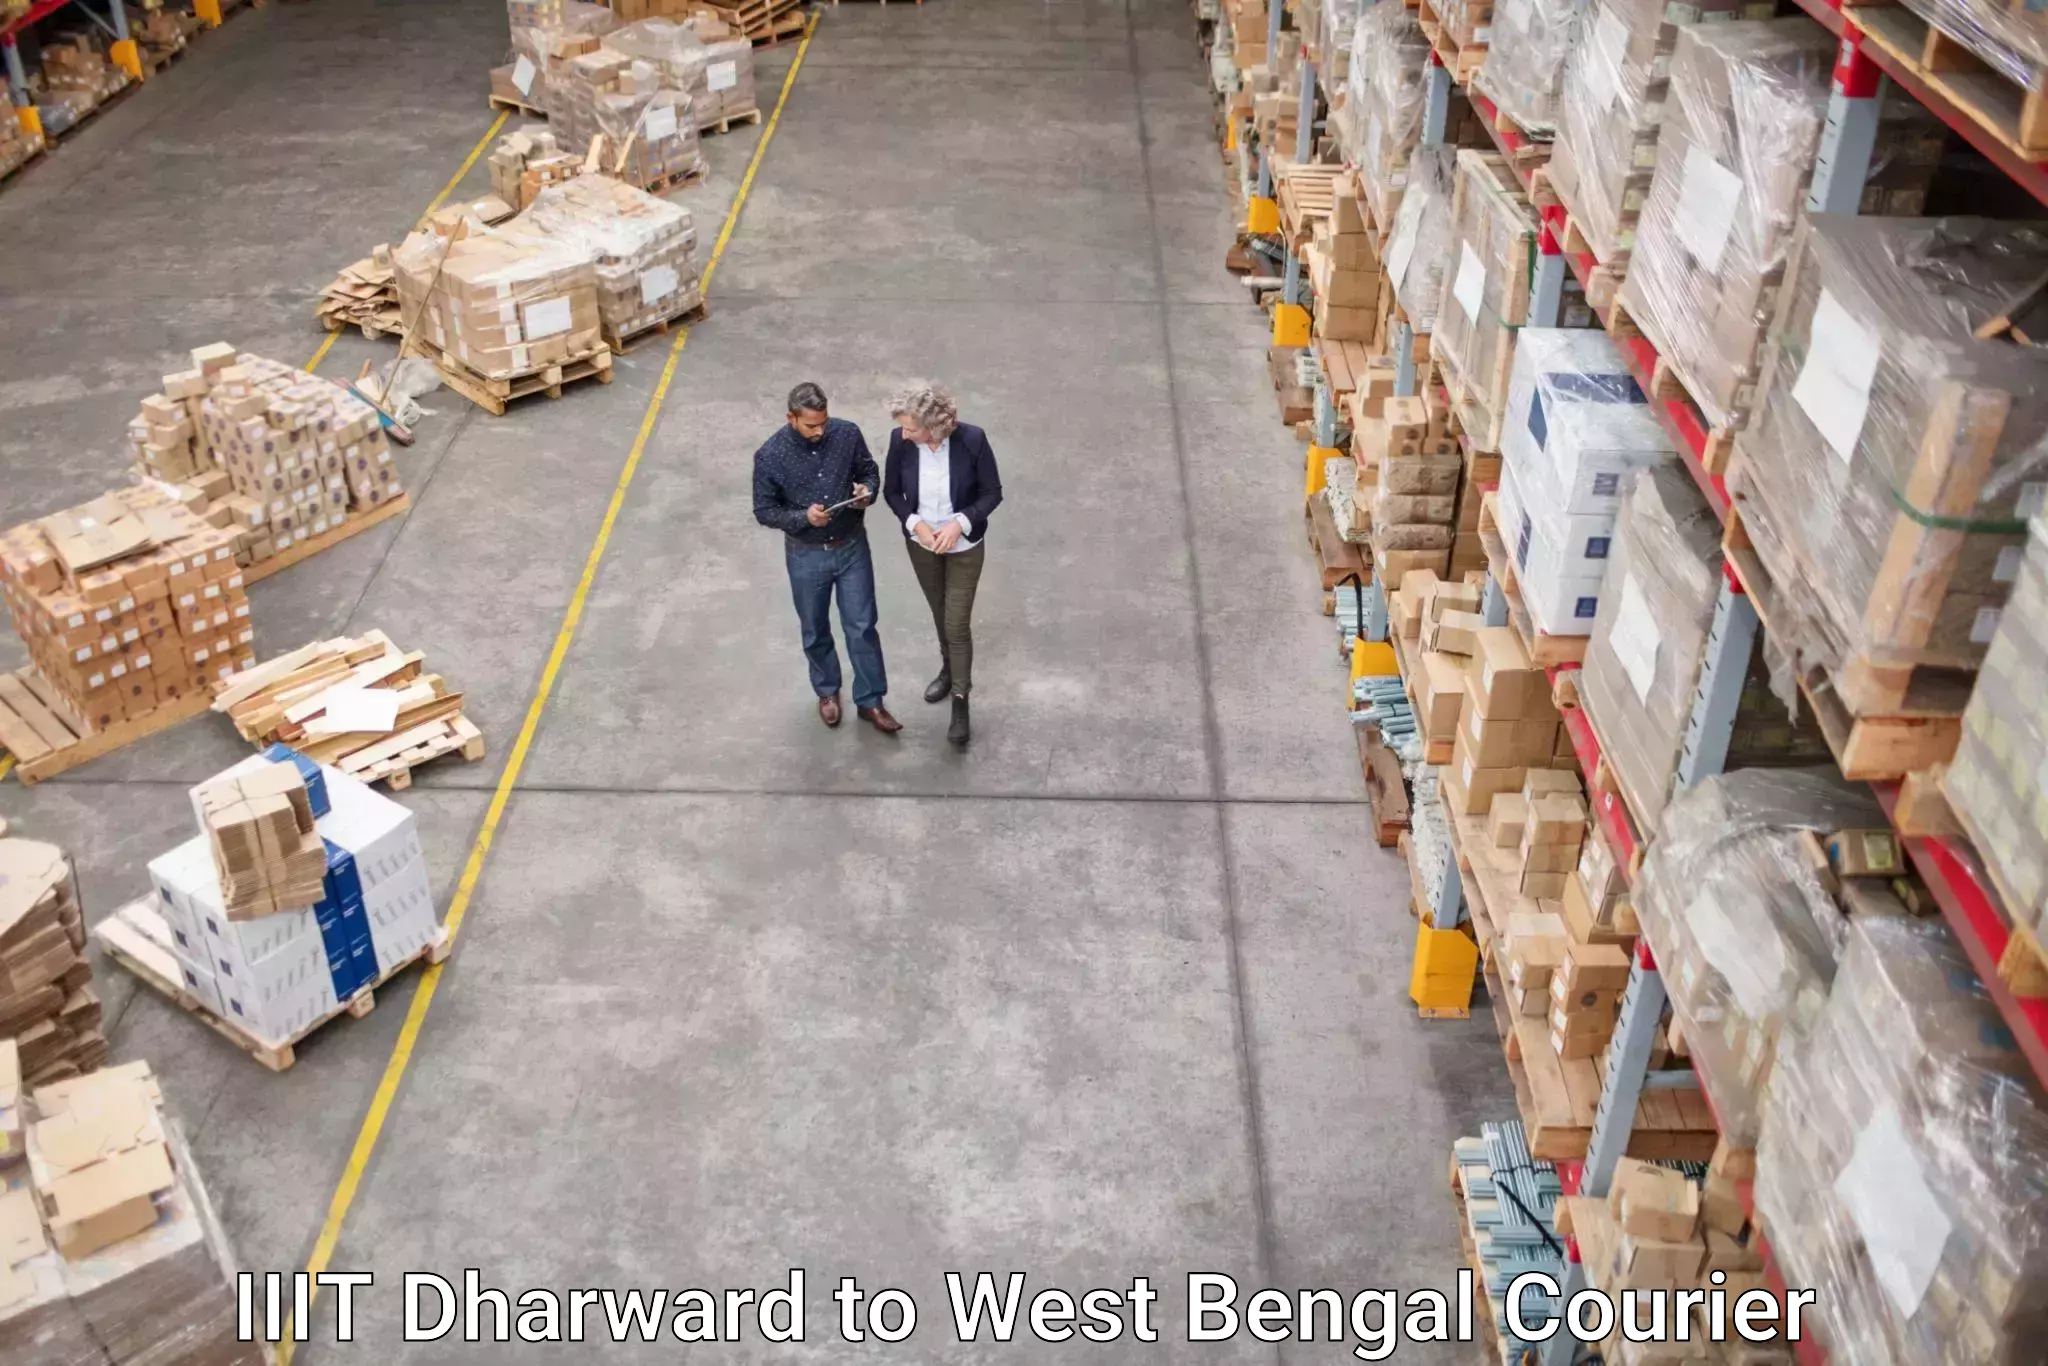 Multi-national courier services IIIT Dharward to Kolkata Port